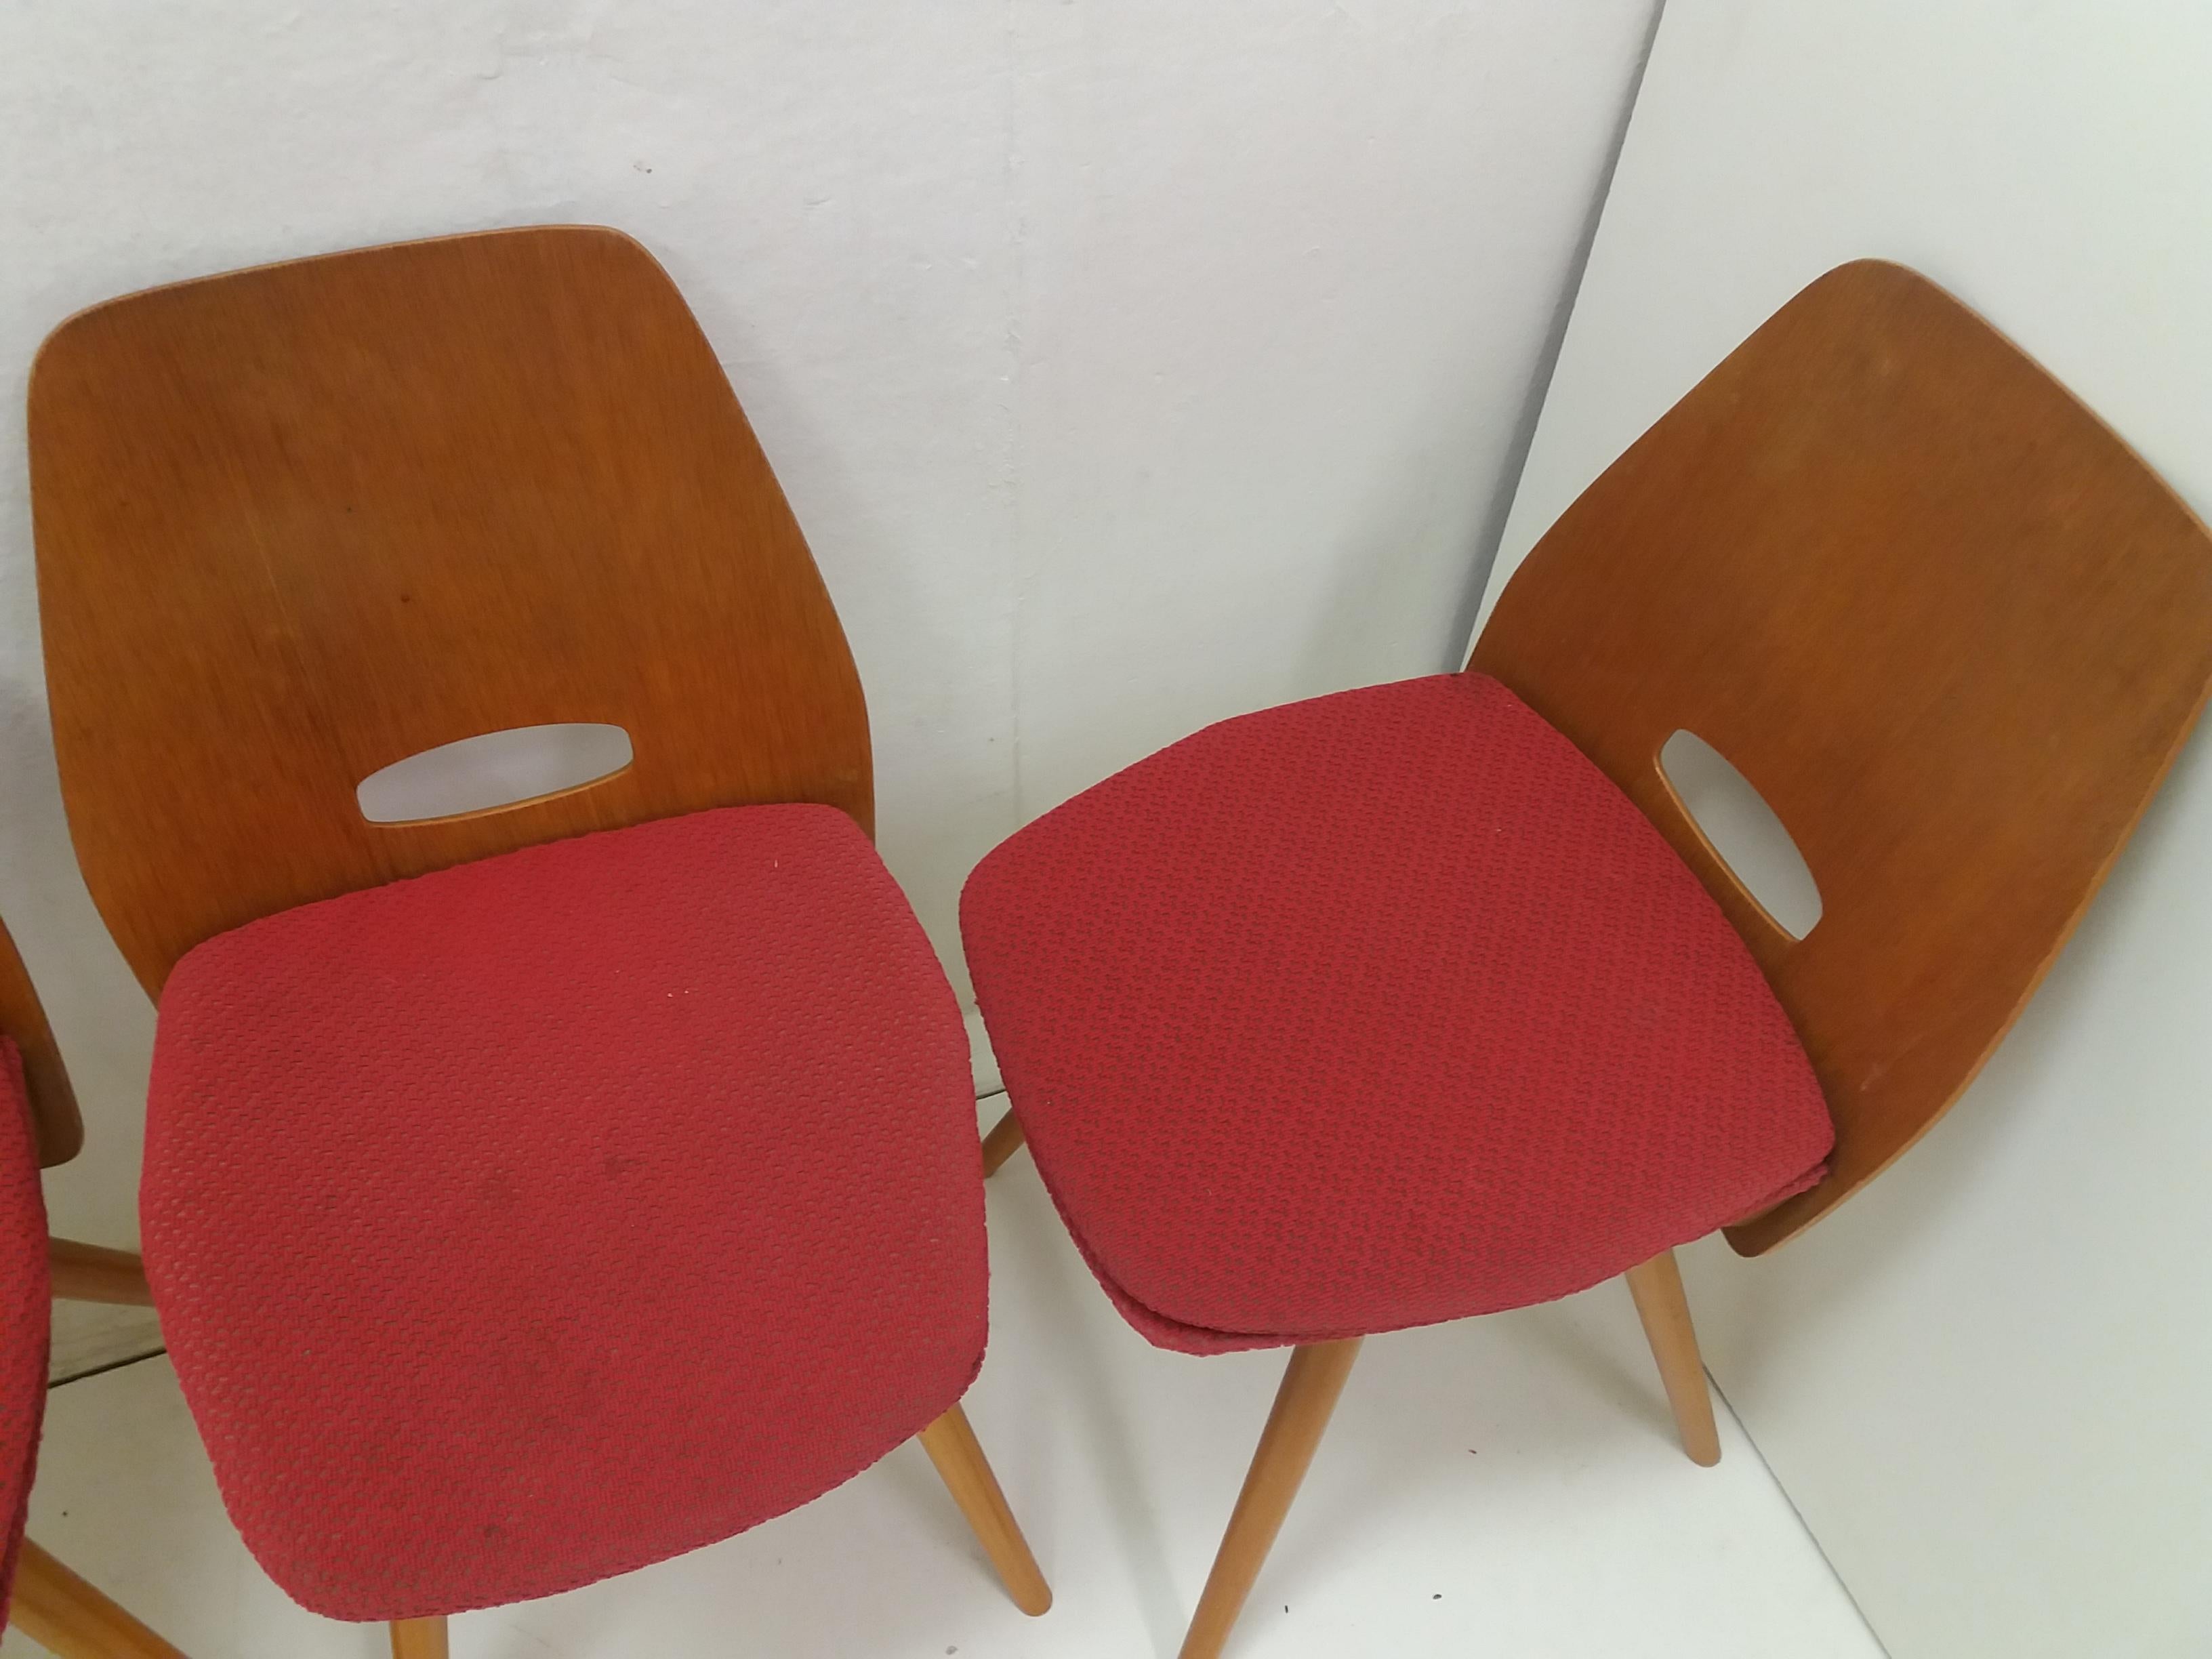 - Made in Czechoslovakia
- Made of wood, fabric
- Reupholstered
- Good, original condition.